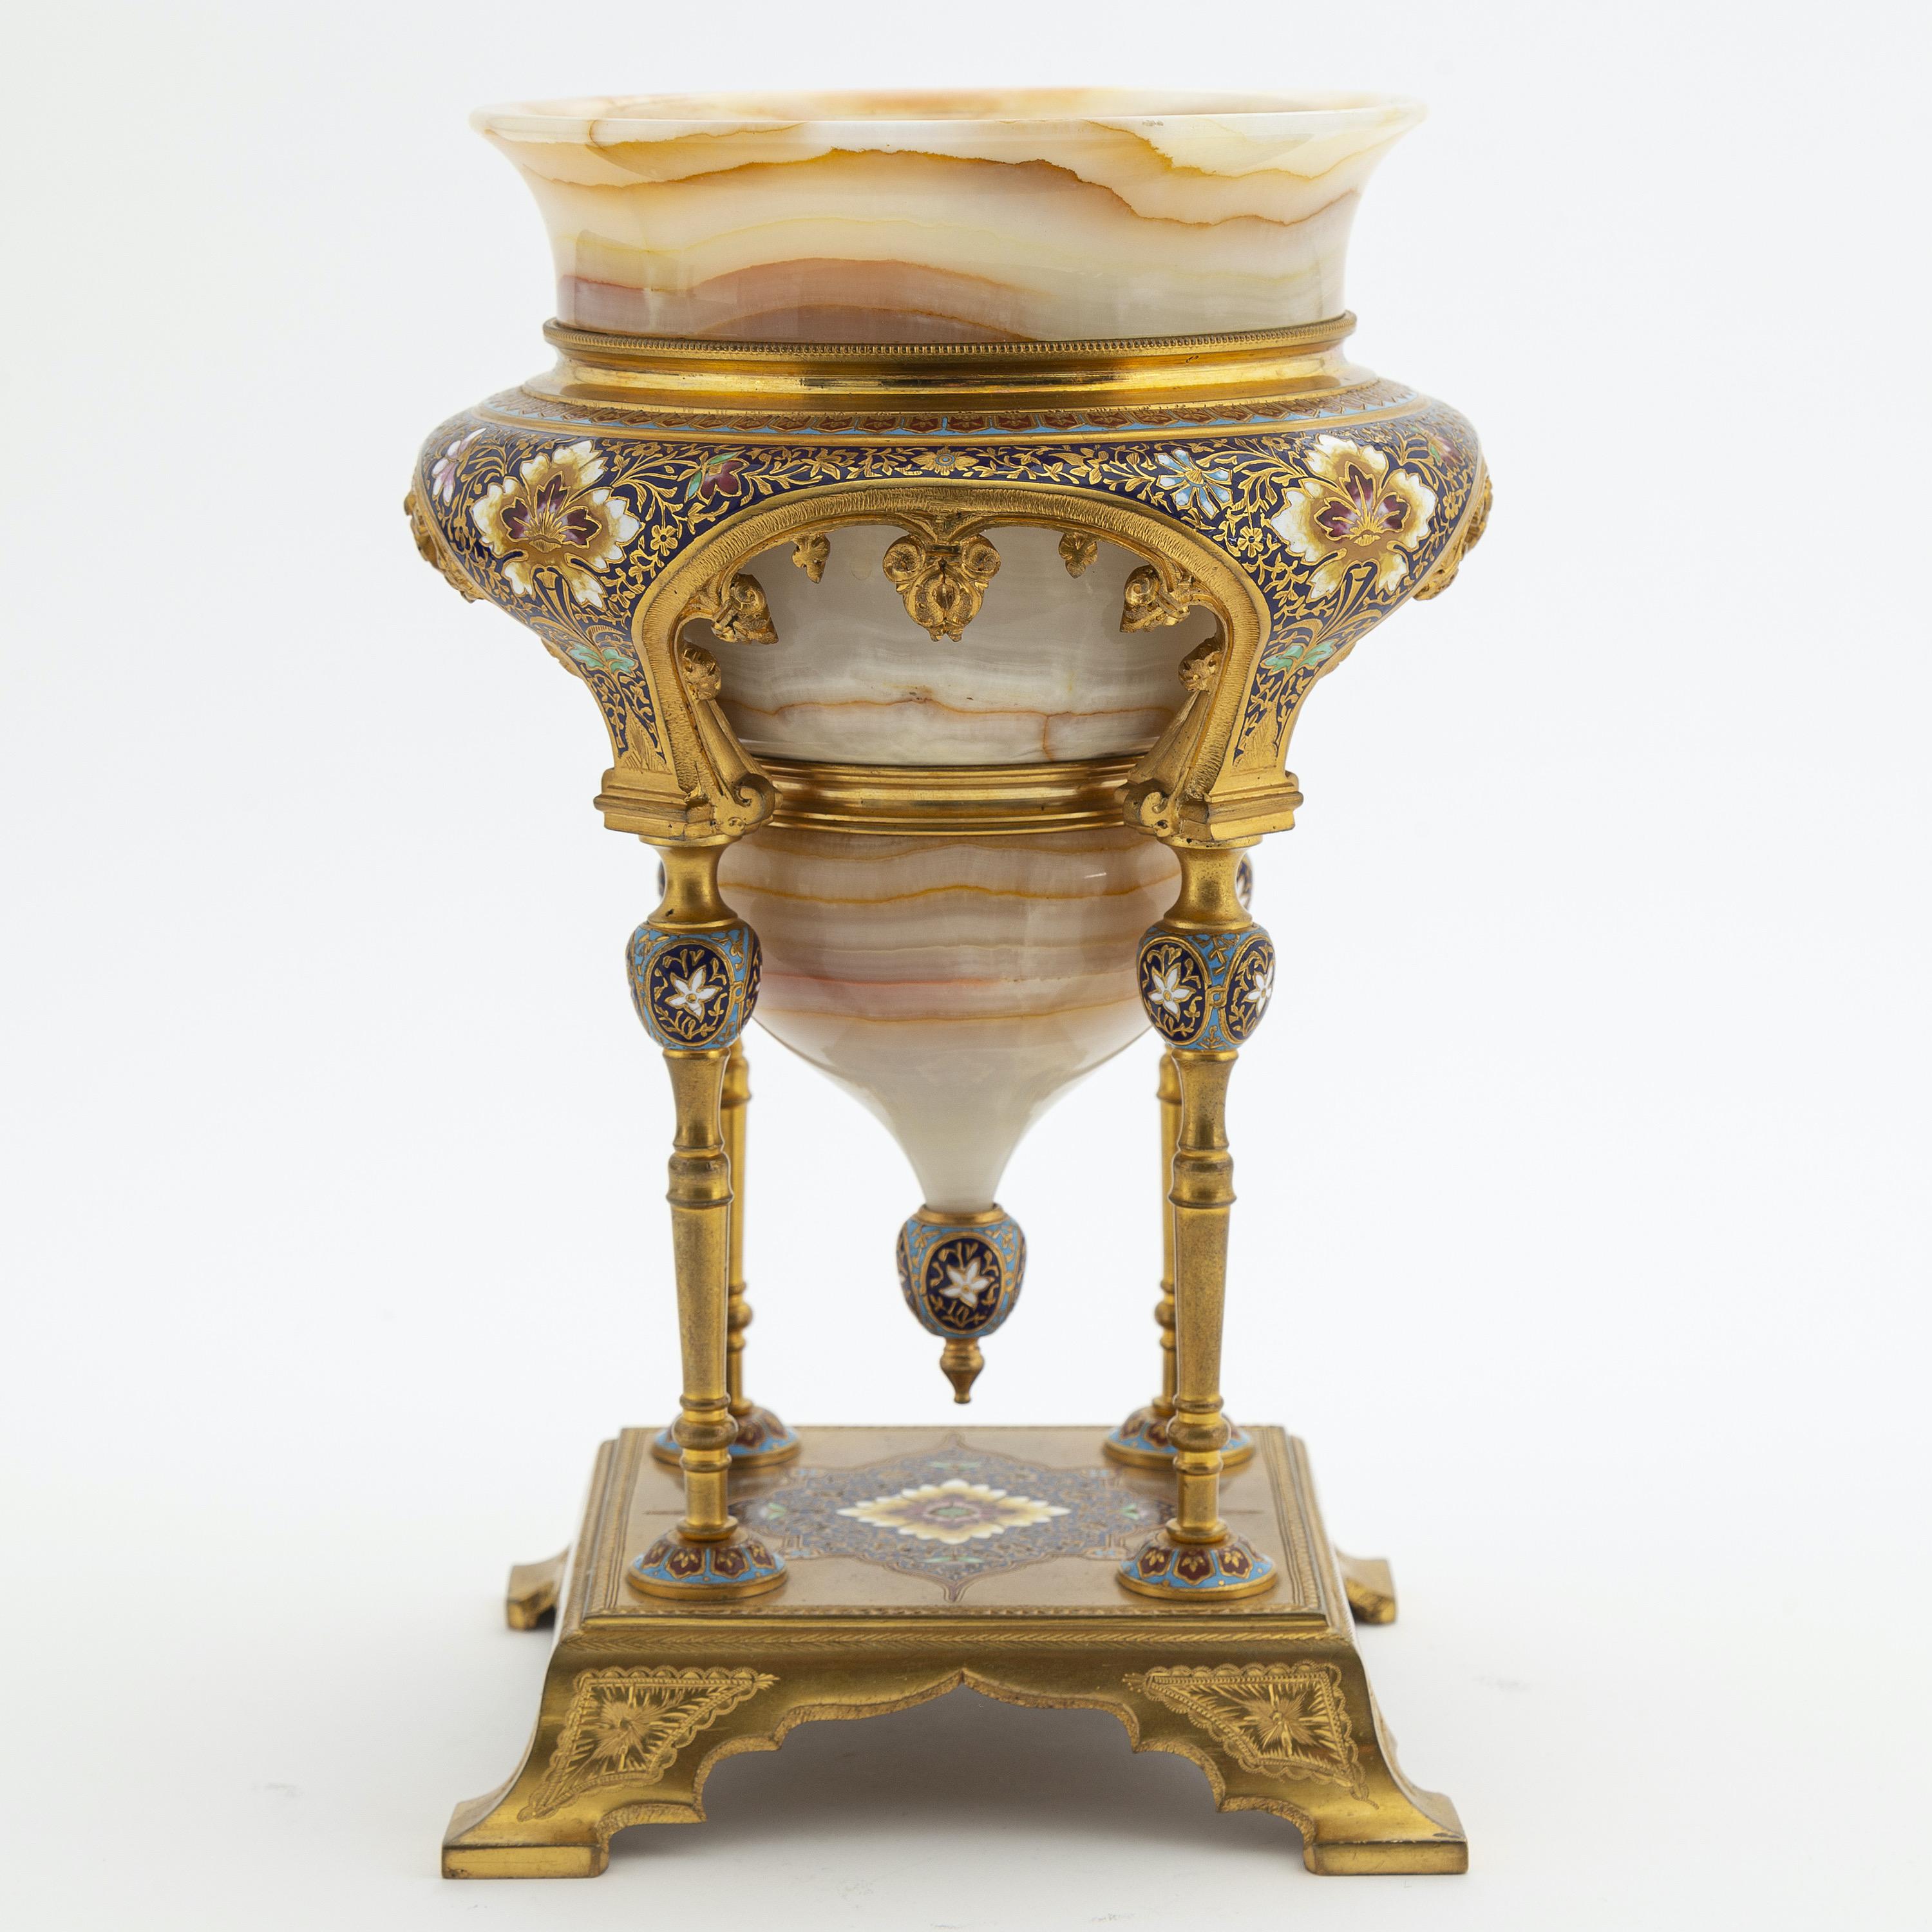 French Late 19th Century Onyx, Champlevé Enamel and Gilt Bronze Urn, Louchet Frères